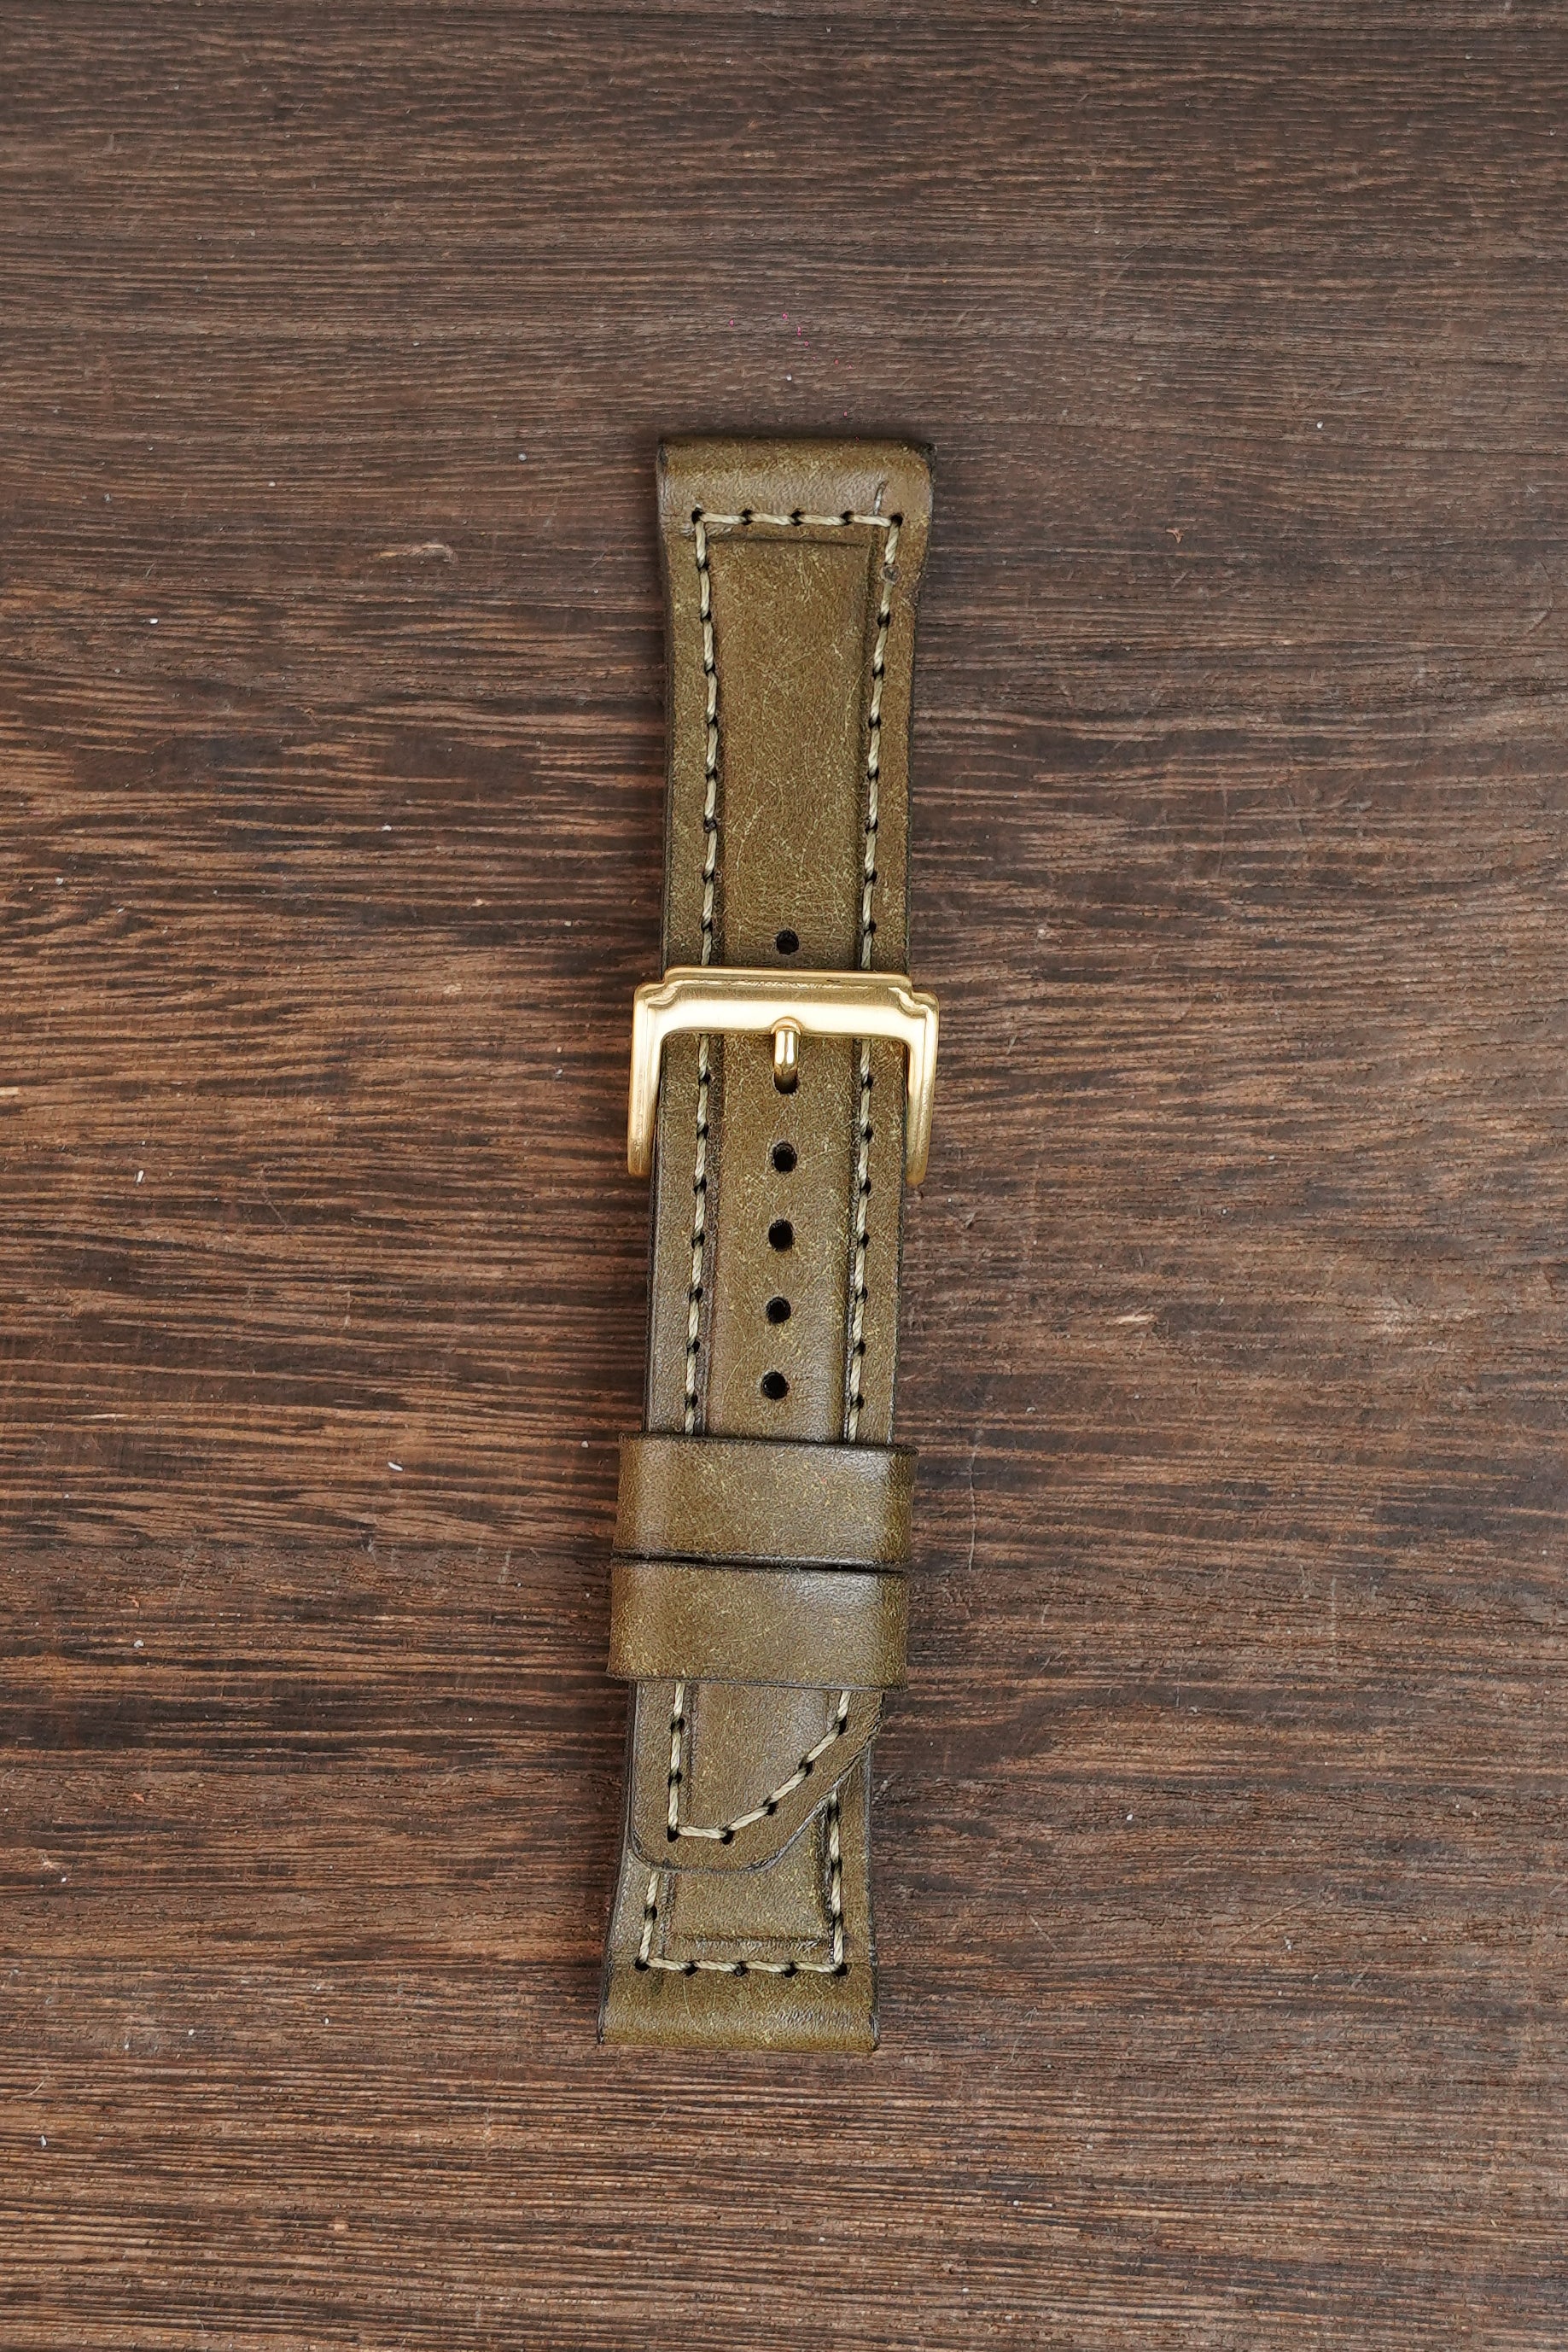 Single Watch Accessory - The Leather Strap